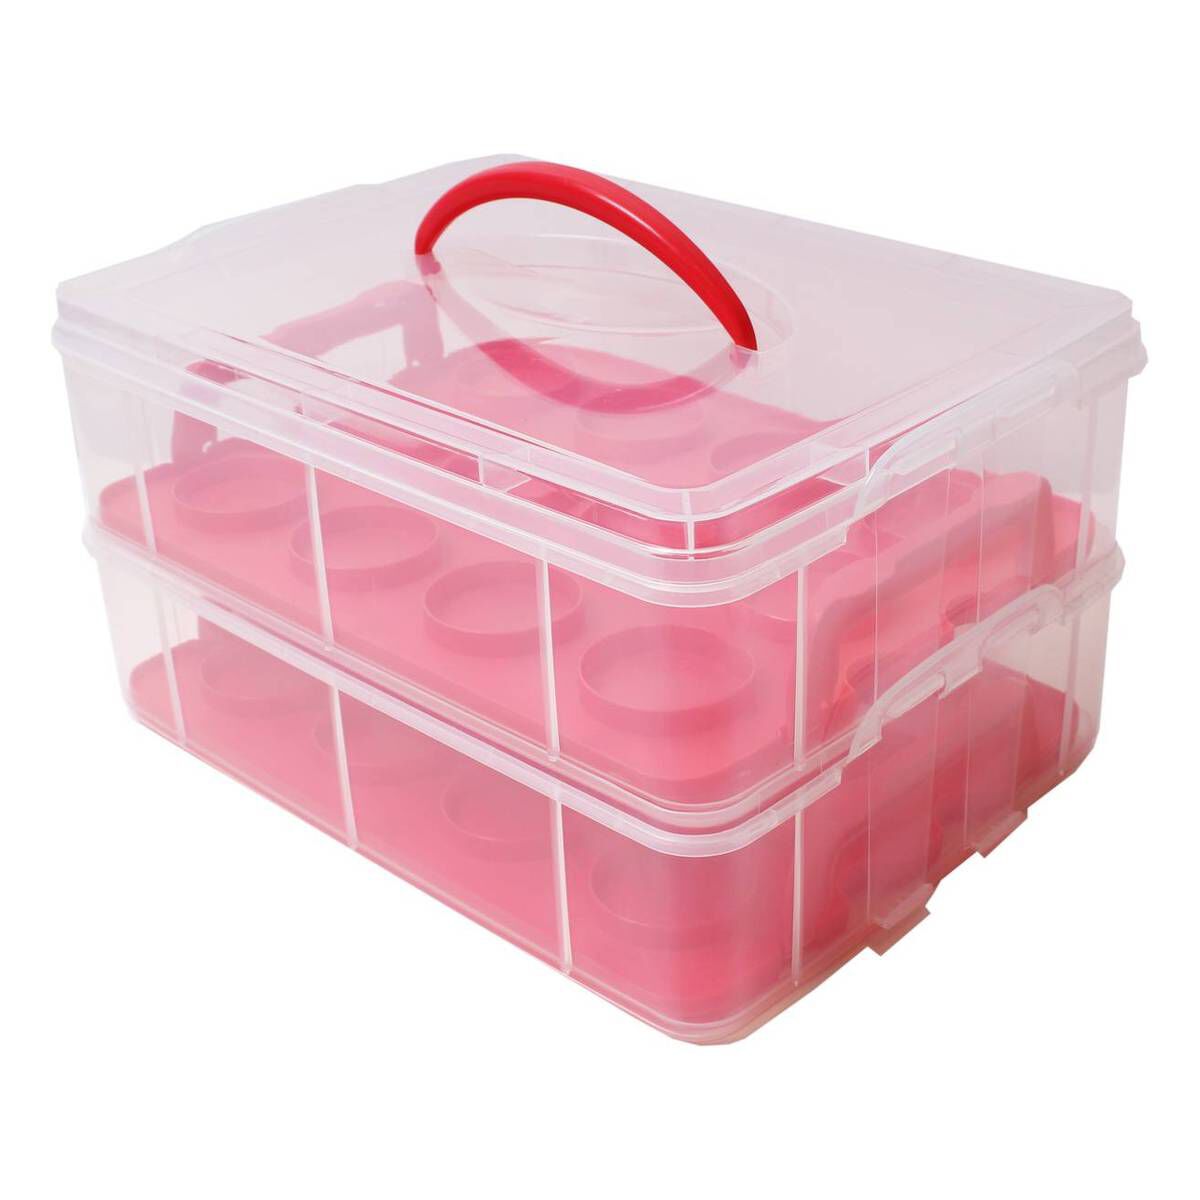 Buy 2x Lemon & Lime 30cm Round Plastic Cake/Dessert Container Box  Holder/Lid Assort at Barbeques Galore.